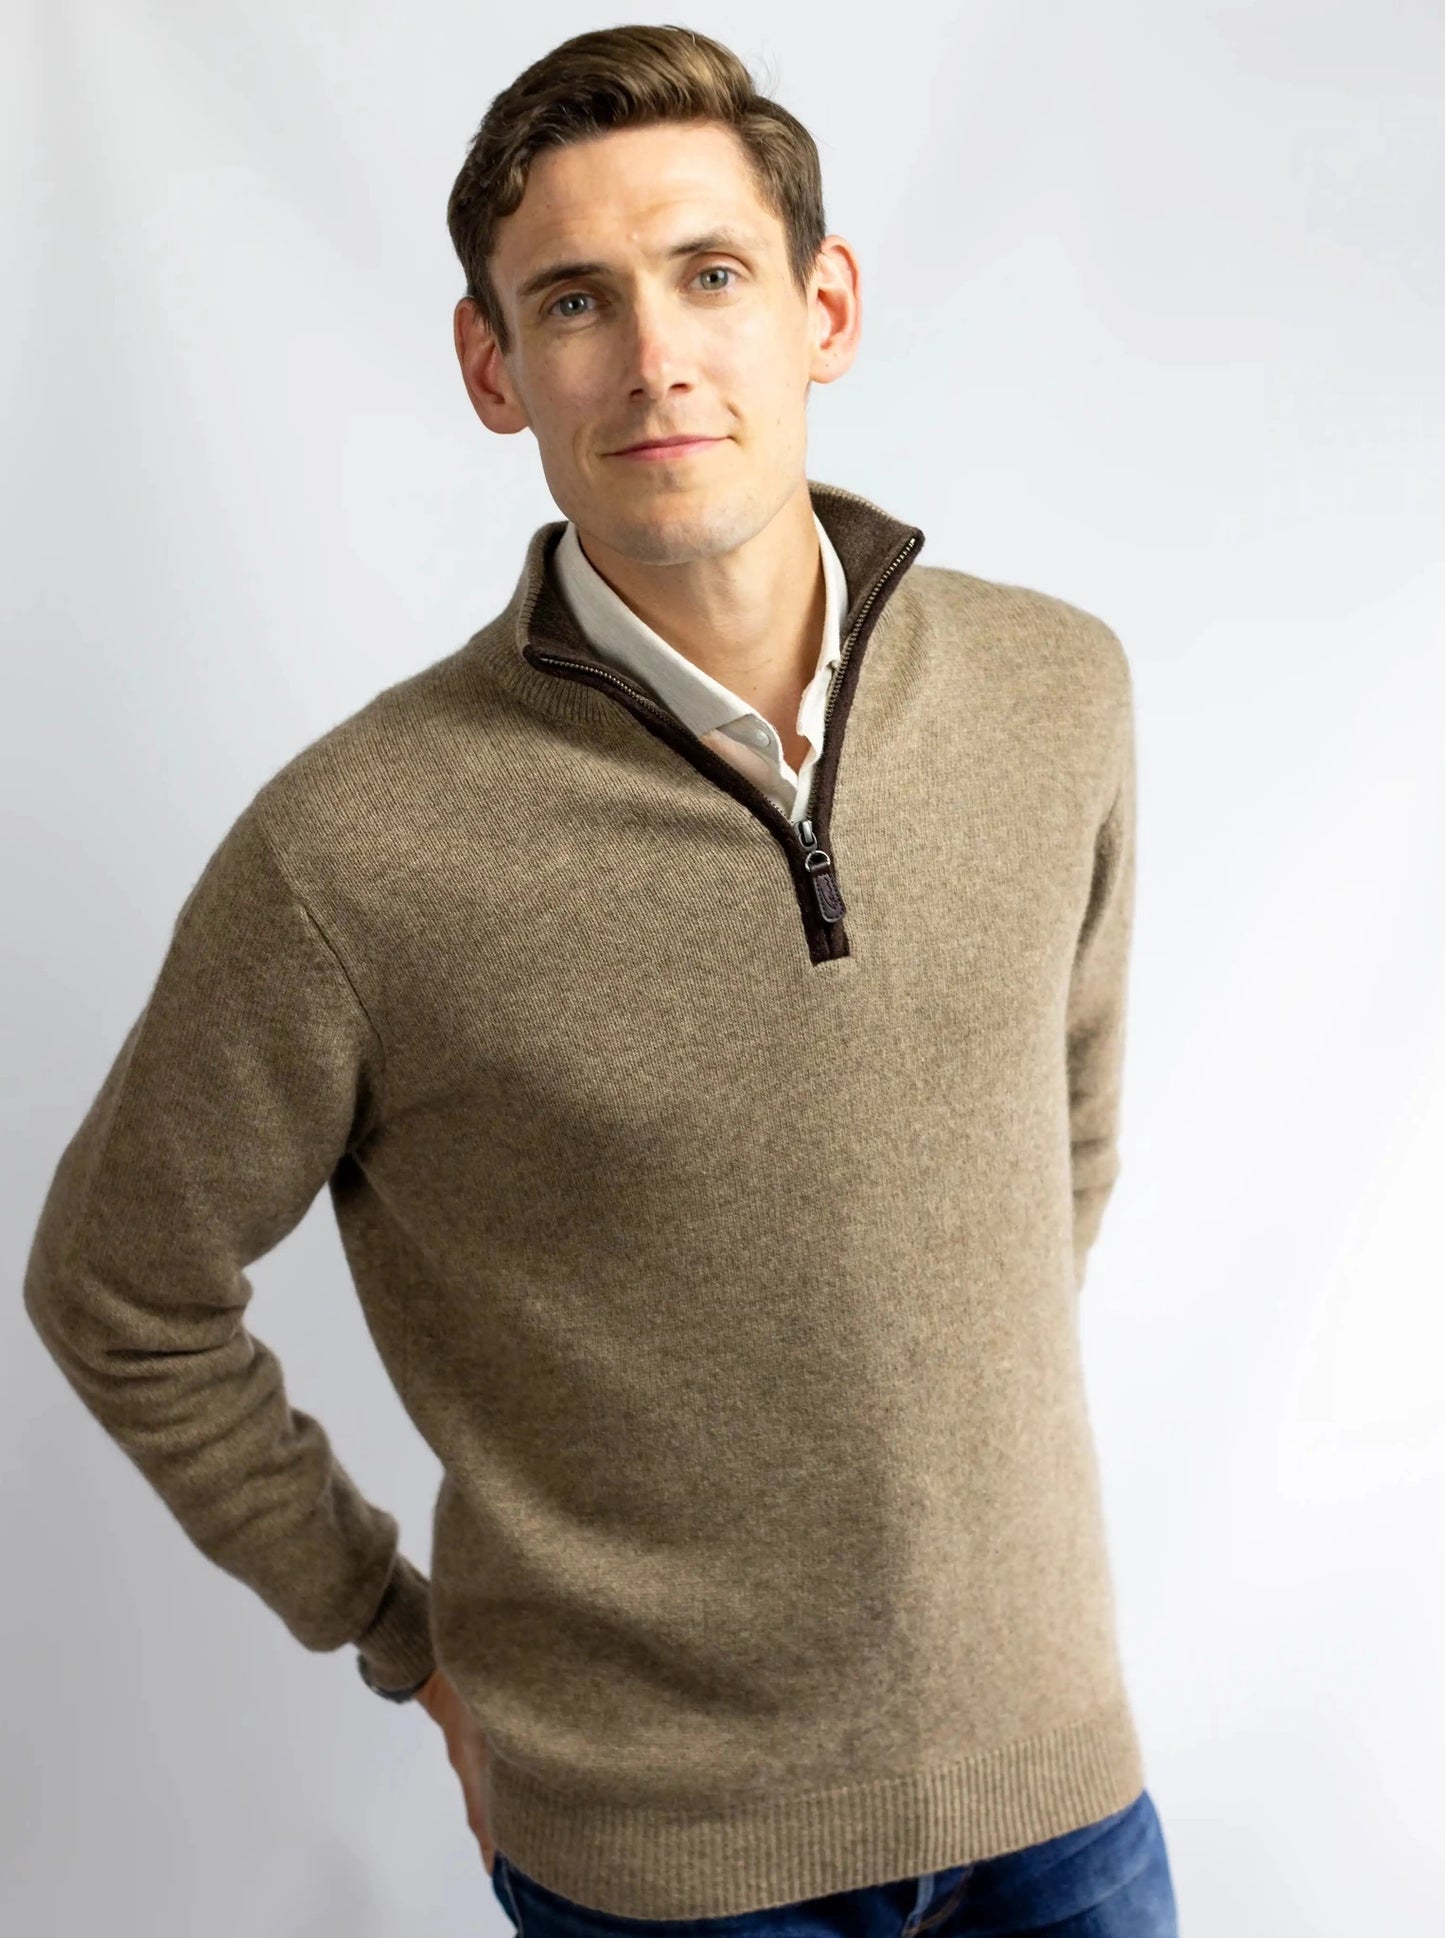 Men's sweater in sustainable undyed light yak yarn quarter zip from Misty Cashmere